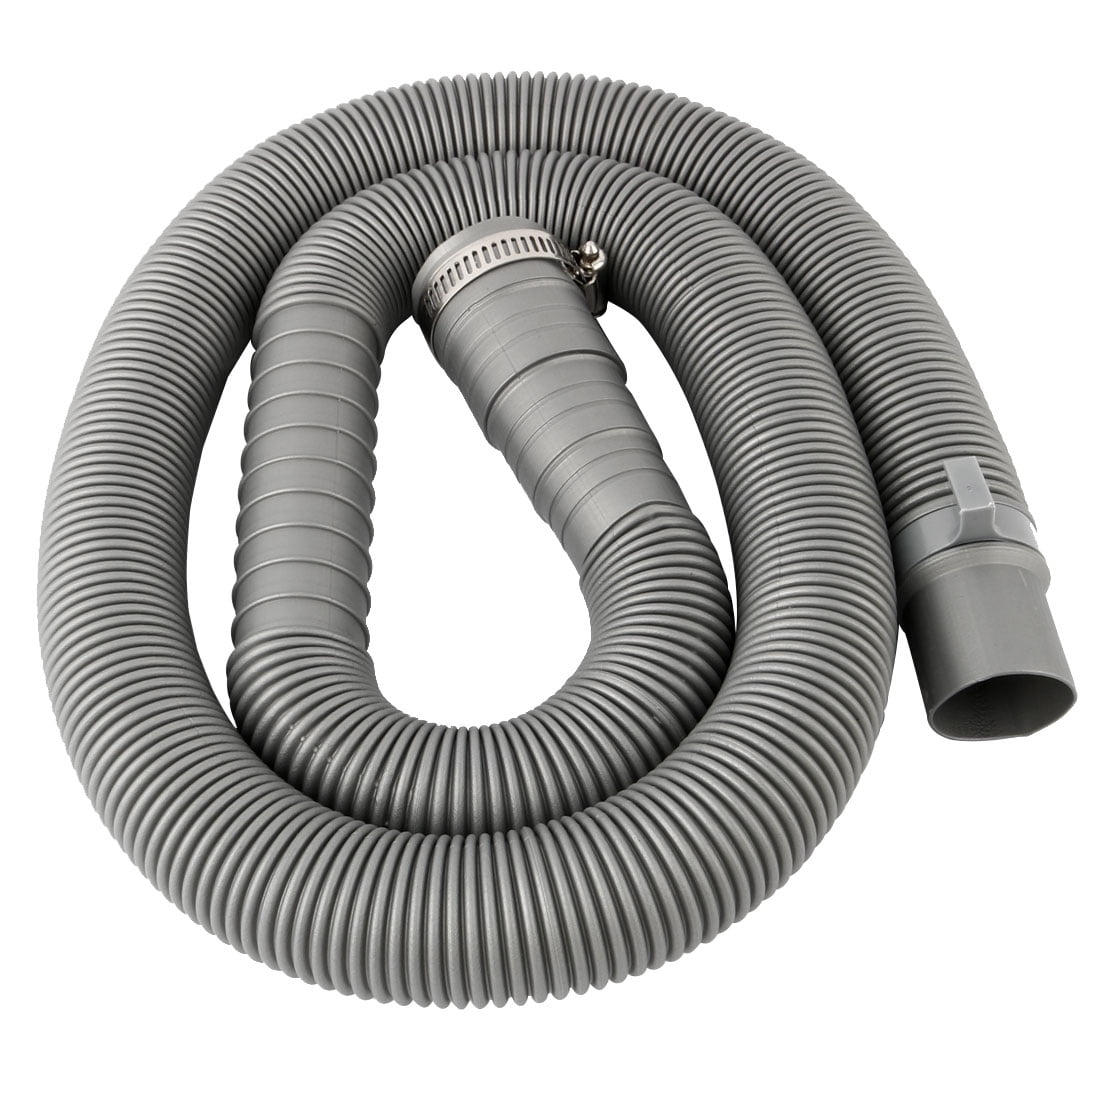 6 Feet Washing Machine Drain Hose by Eligara Universal Fit All Washer Drain Hose Extension/Replacement Kit Long Discharge Pipe